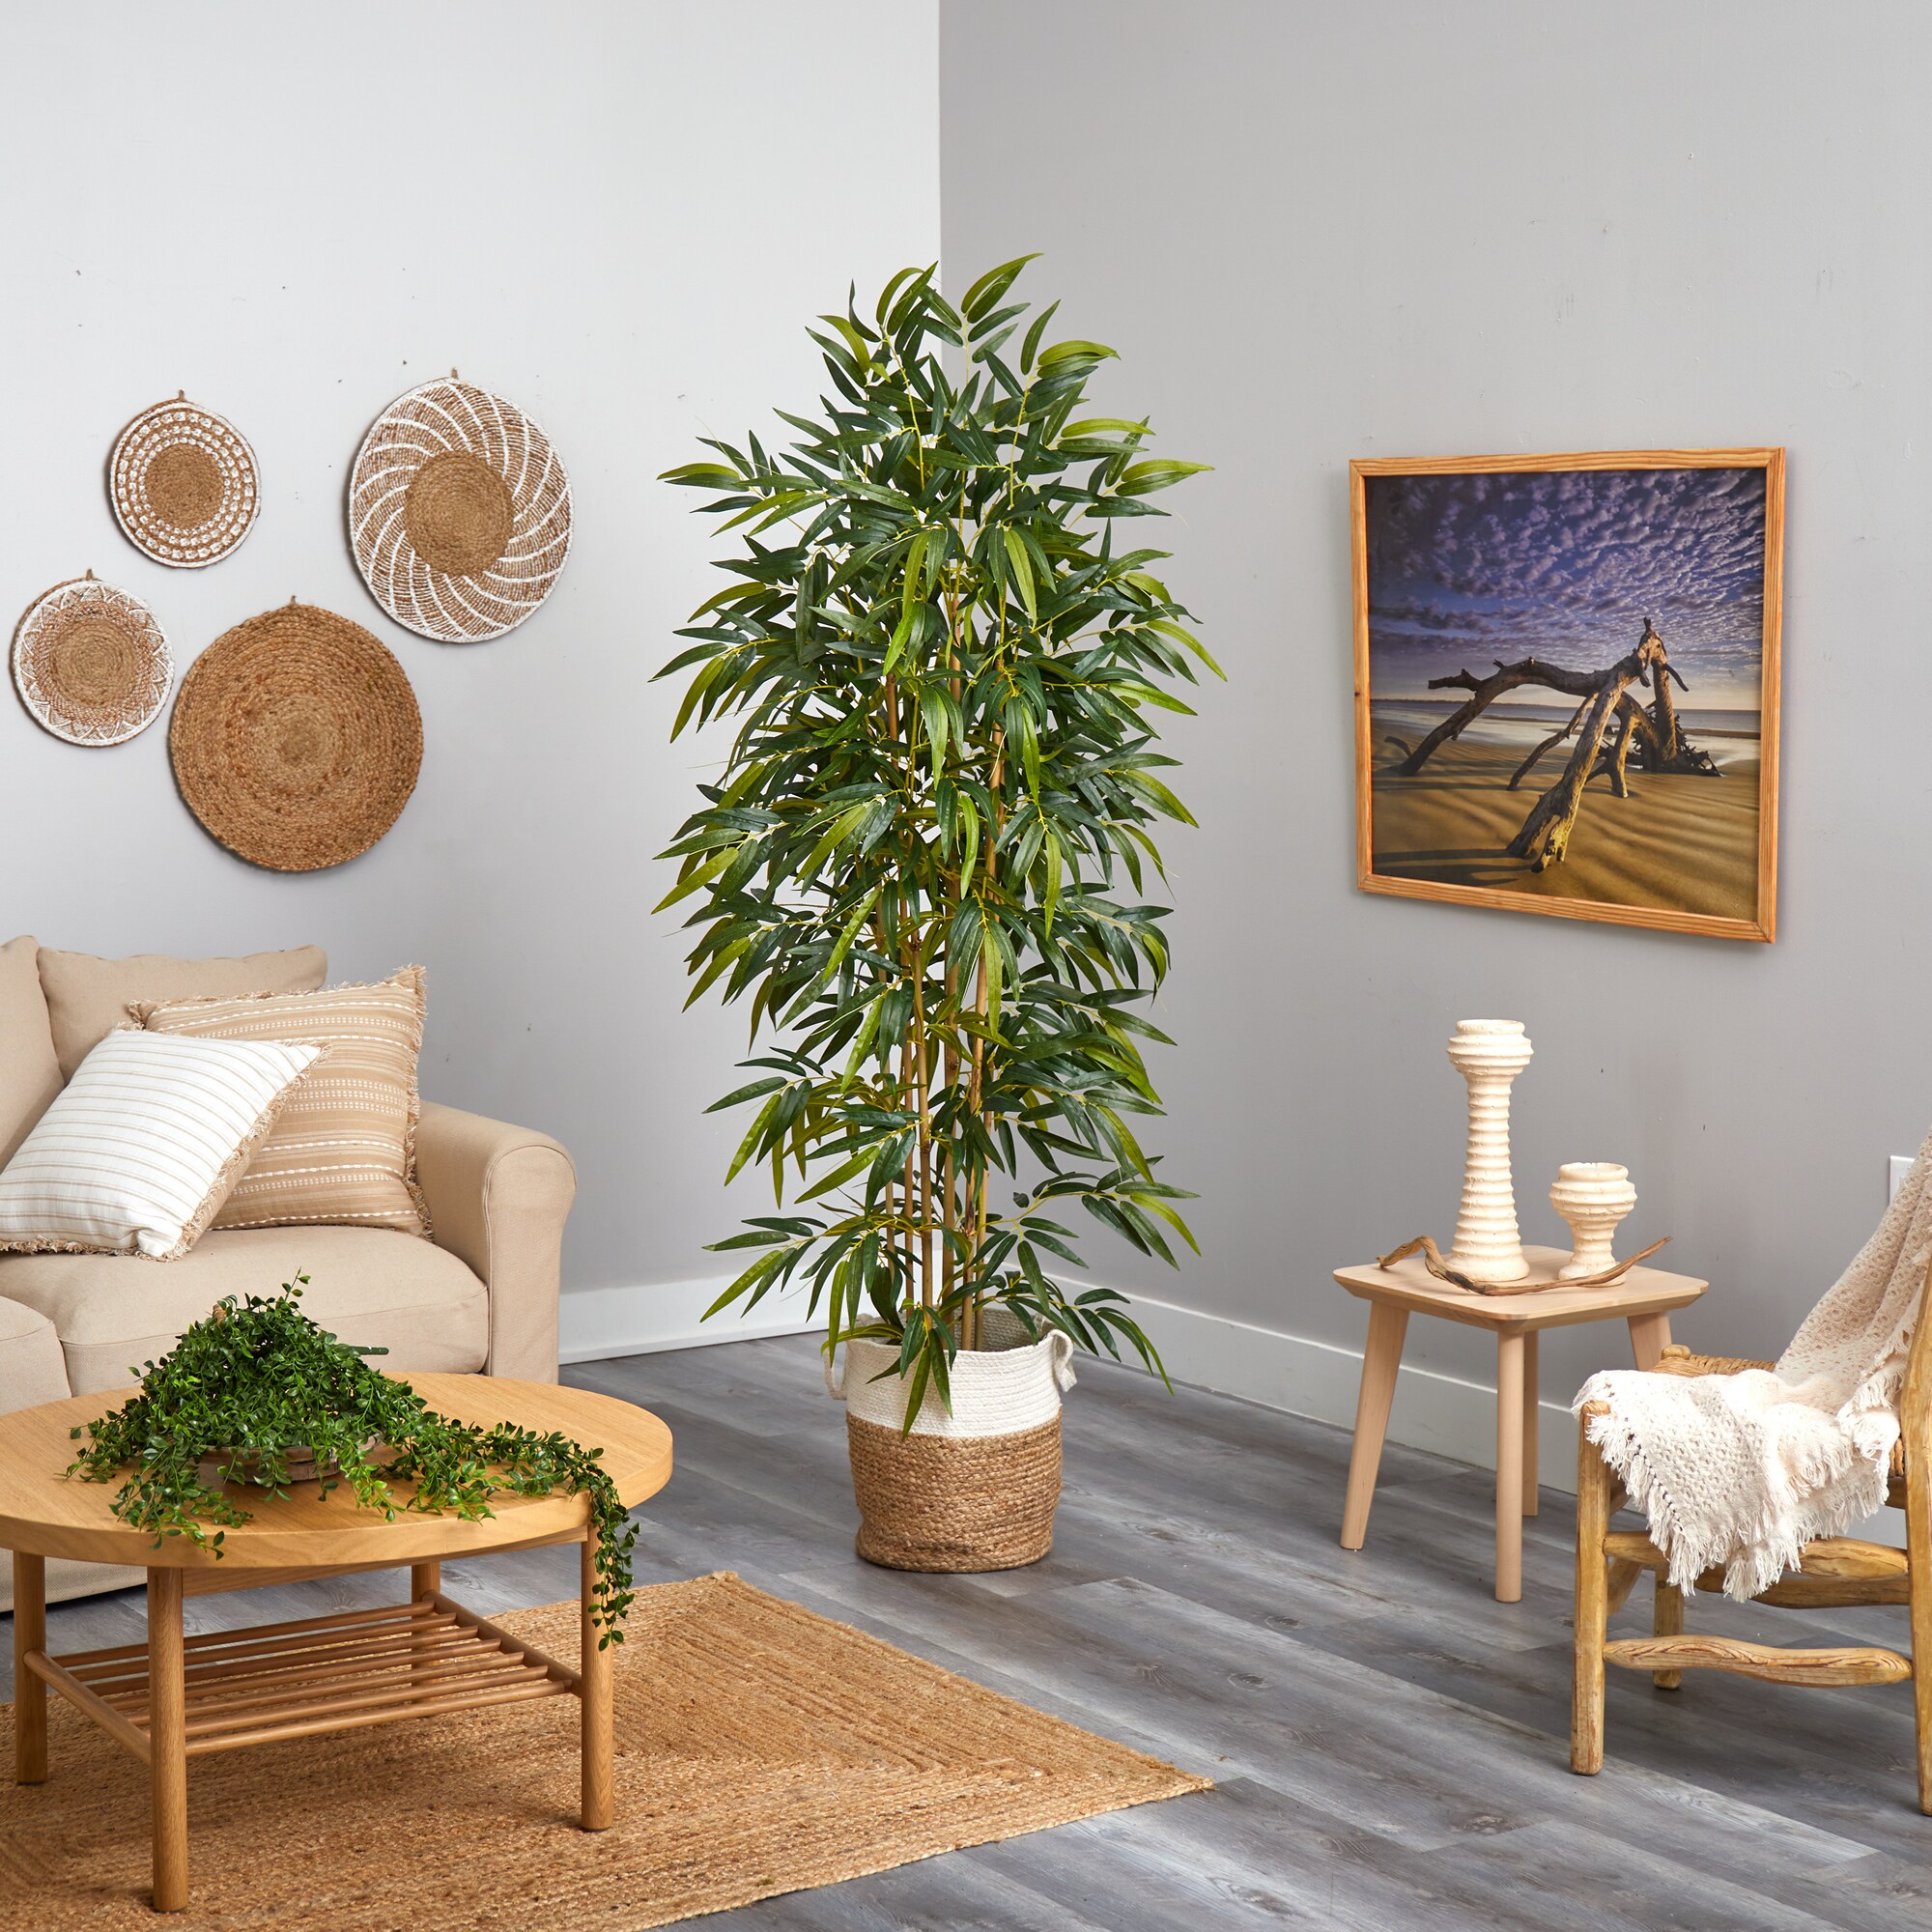 Nearly Natural 4.5ft. Bamboo Artificial Tree in Bamboo Planter 